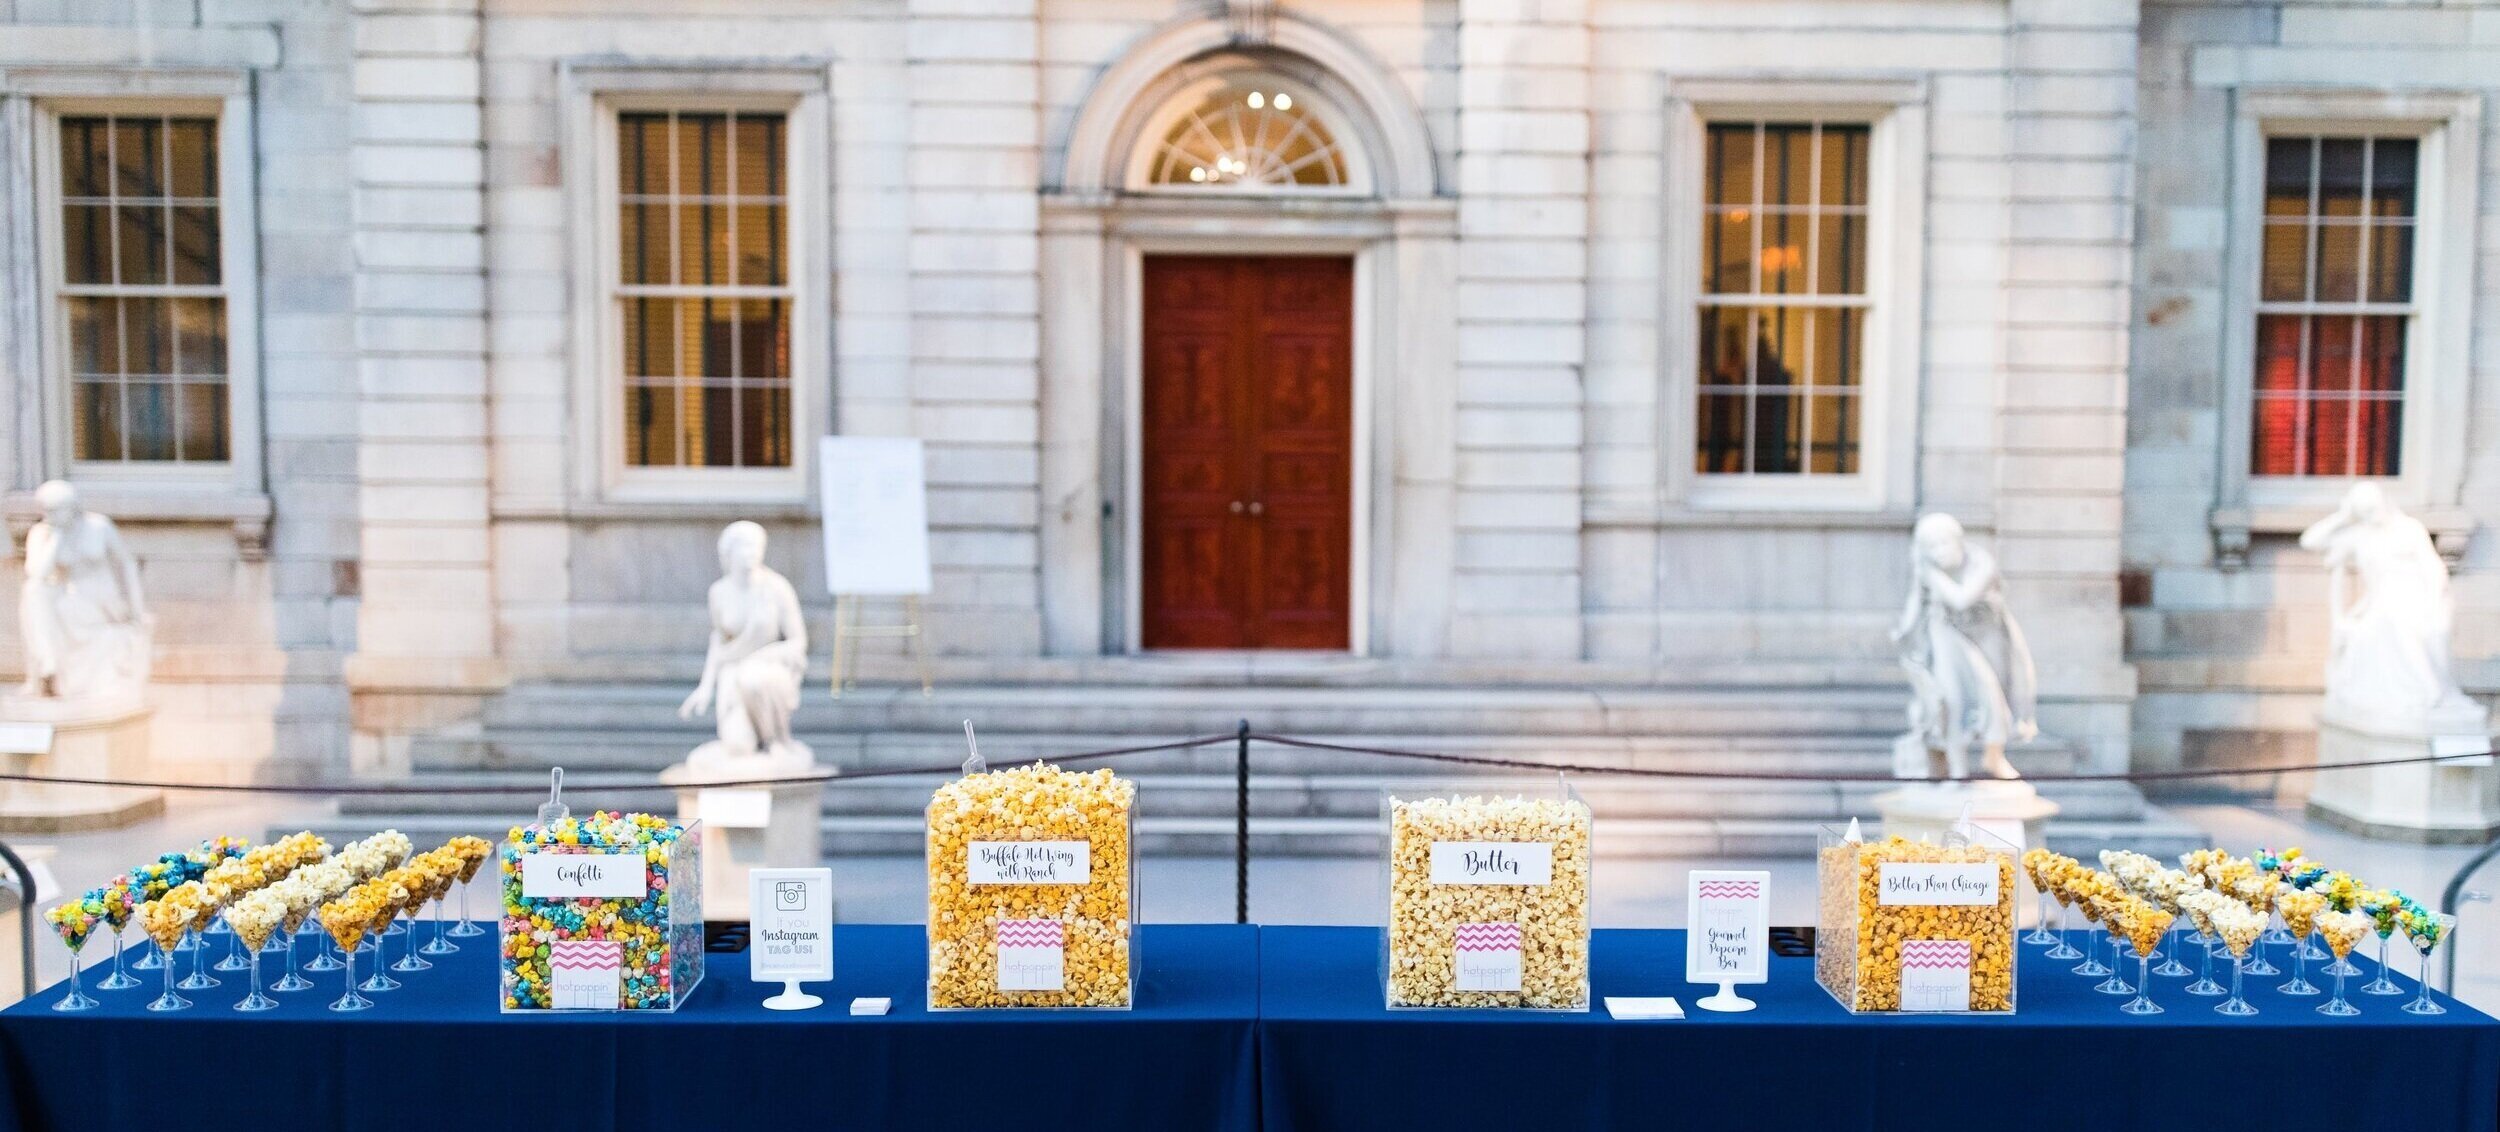 Popcorn bar setup for an event at the Met Museum